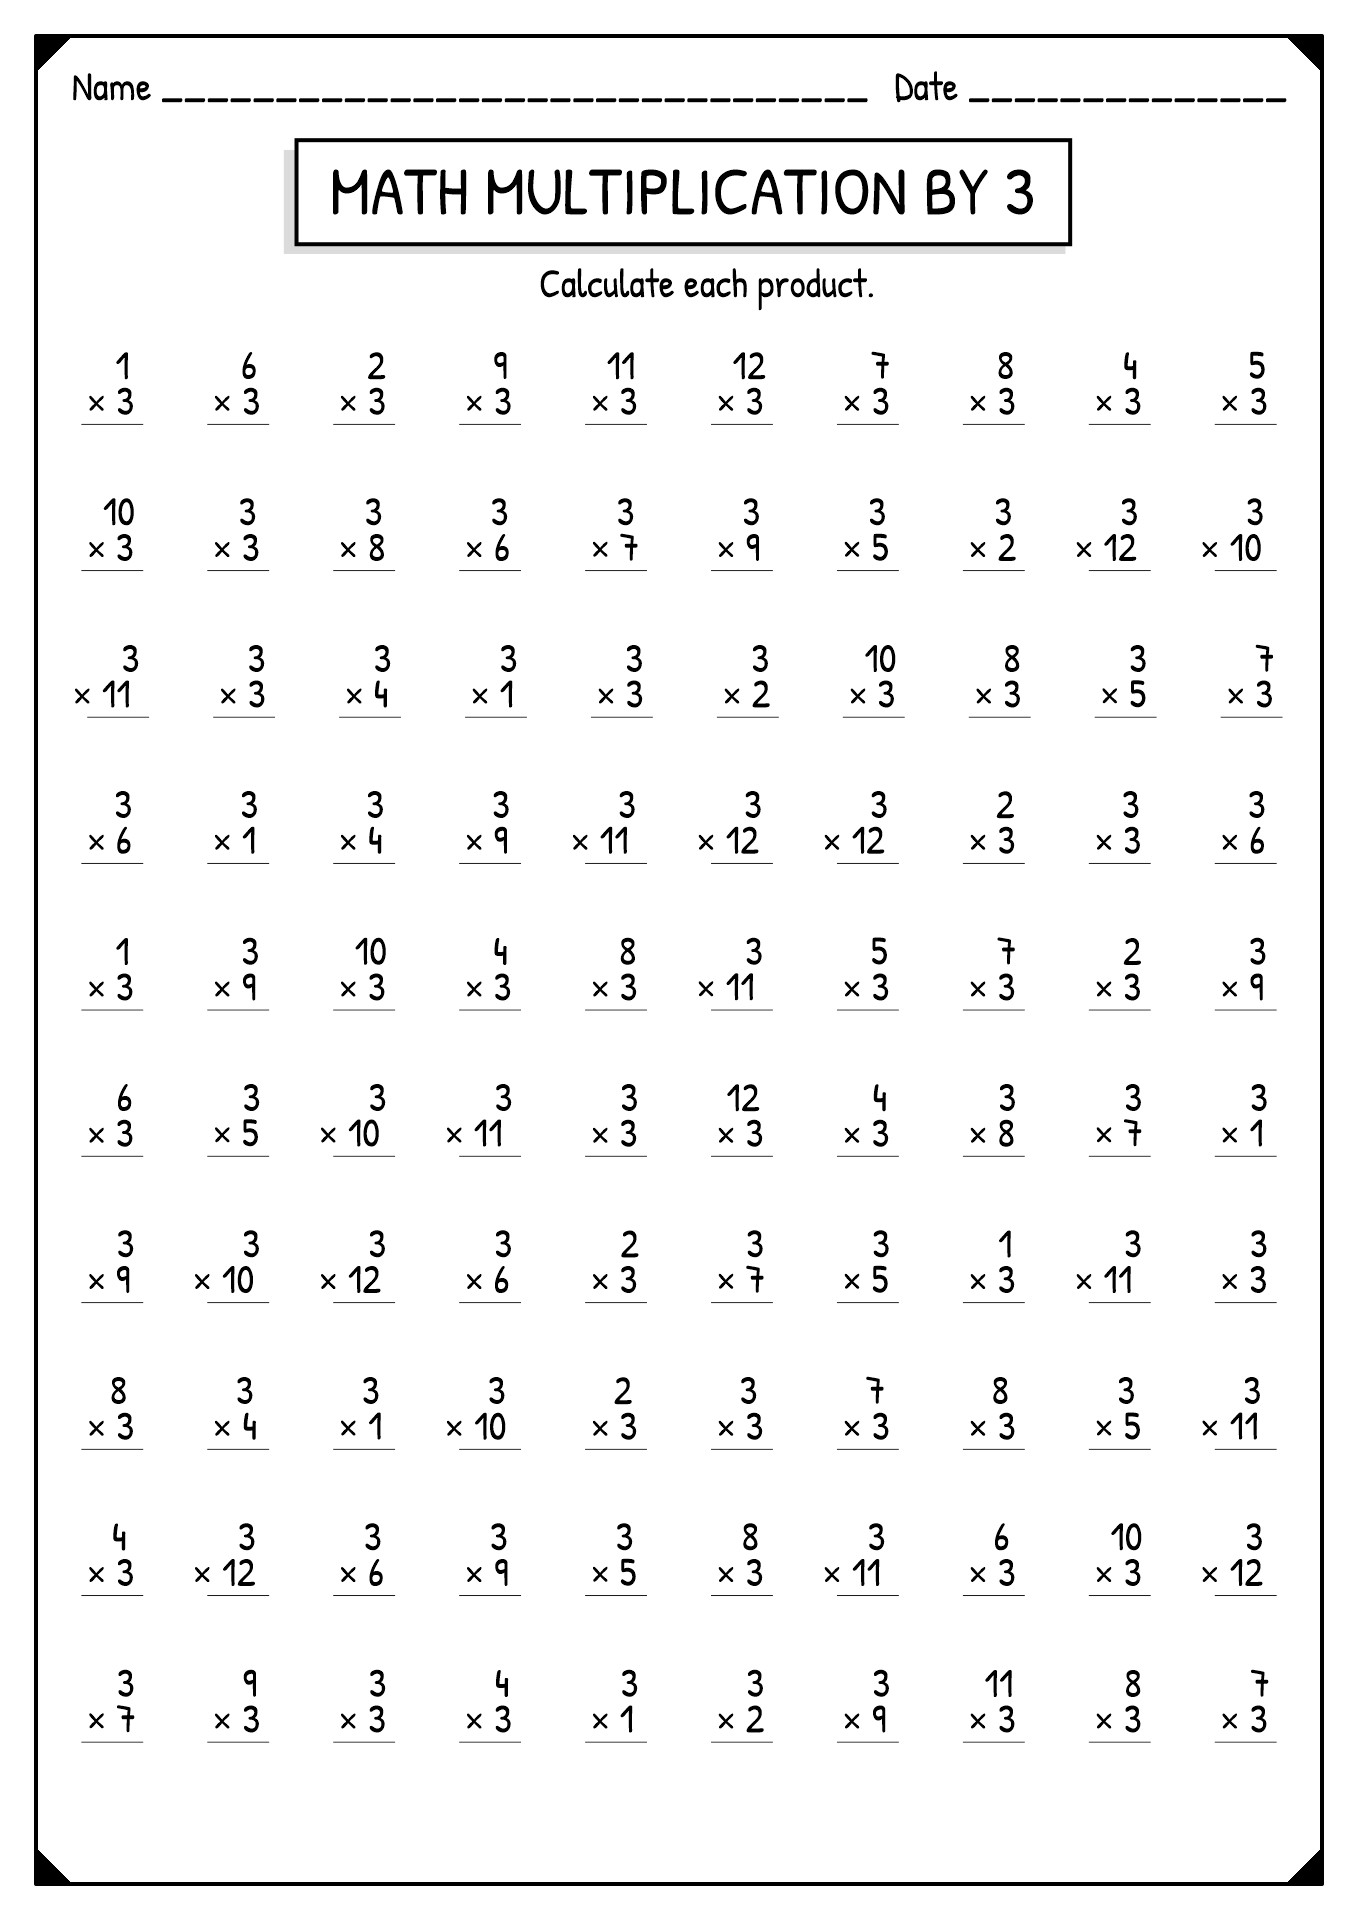 Multiplication Worksheets by 3